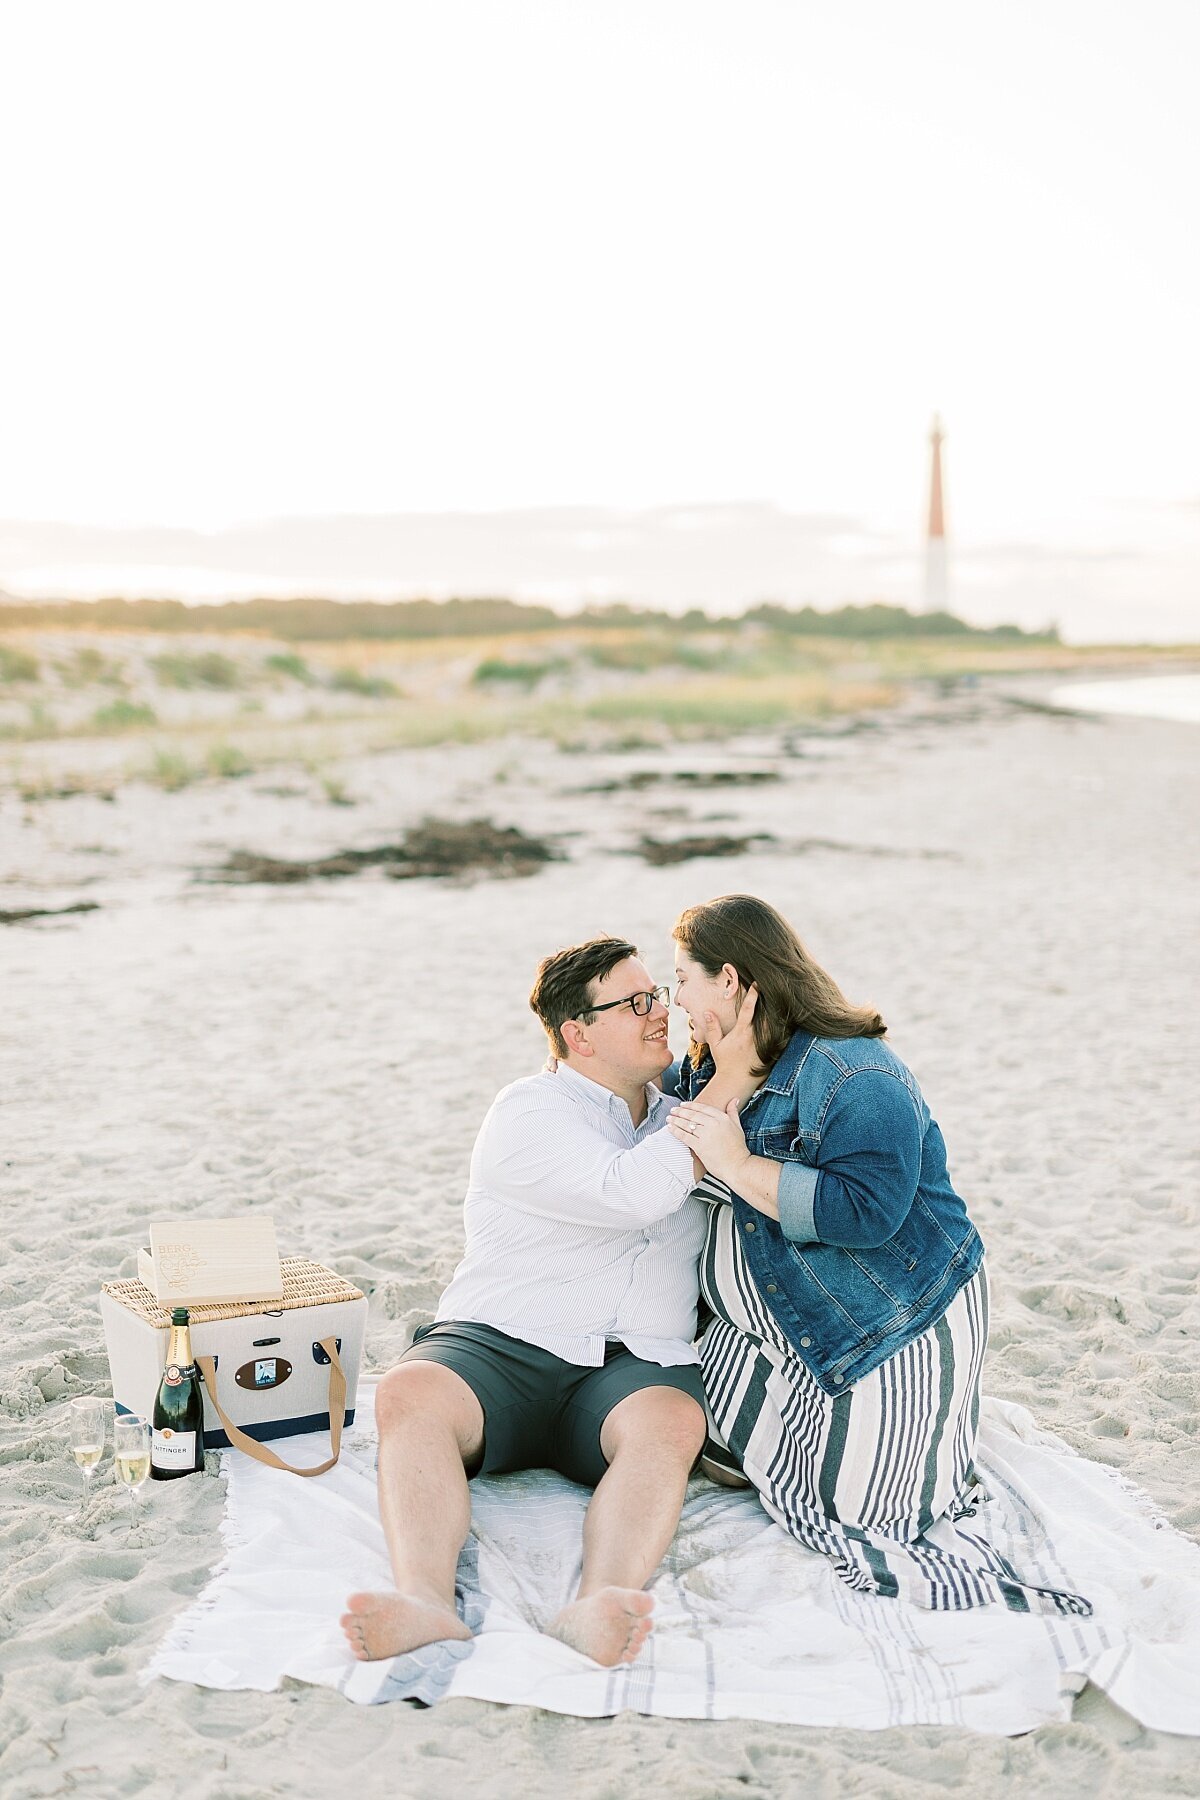 rebecca shivers photography lancaster wedding photographer pa wedding harrisburg wedding photographer bright and airy barnetgat engagement lighthouse